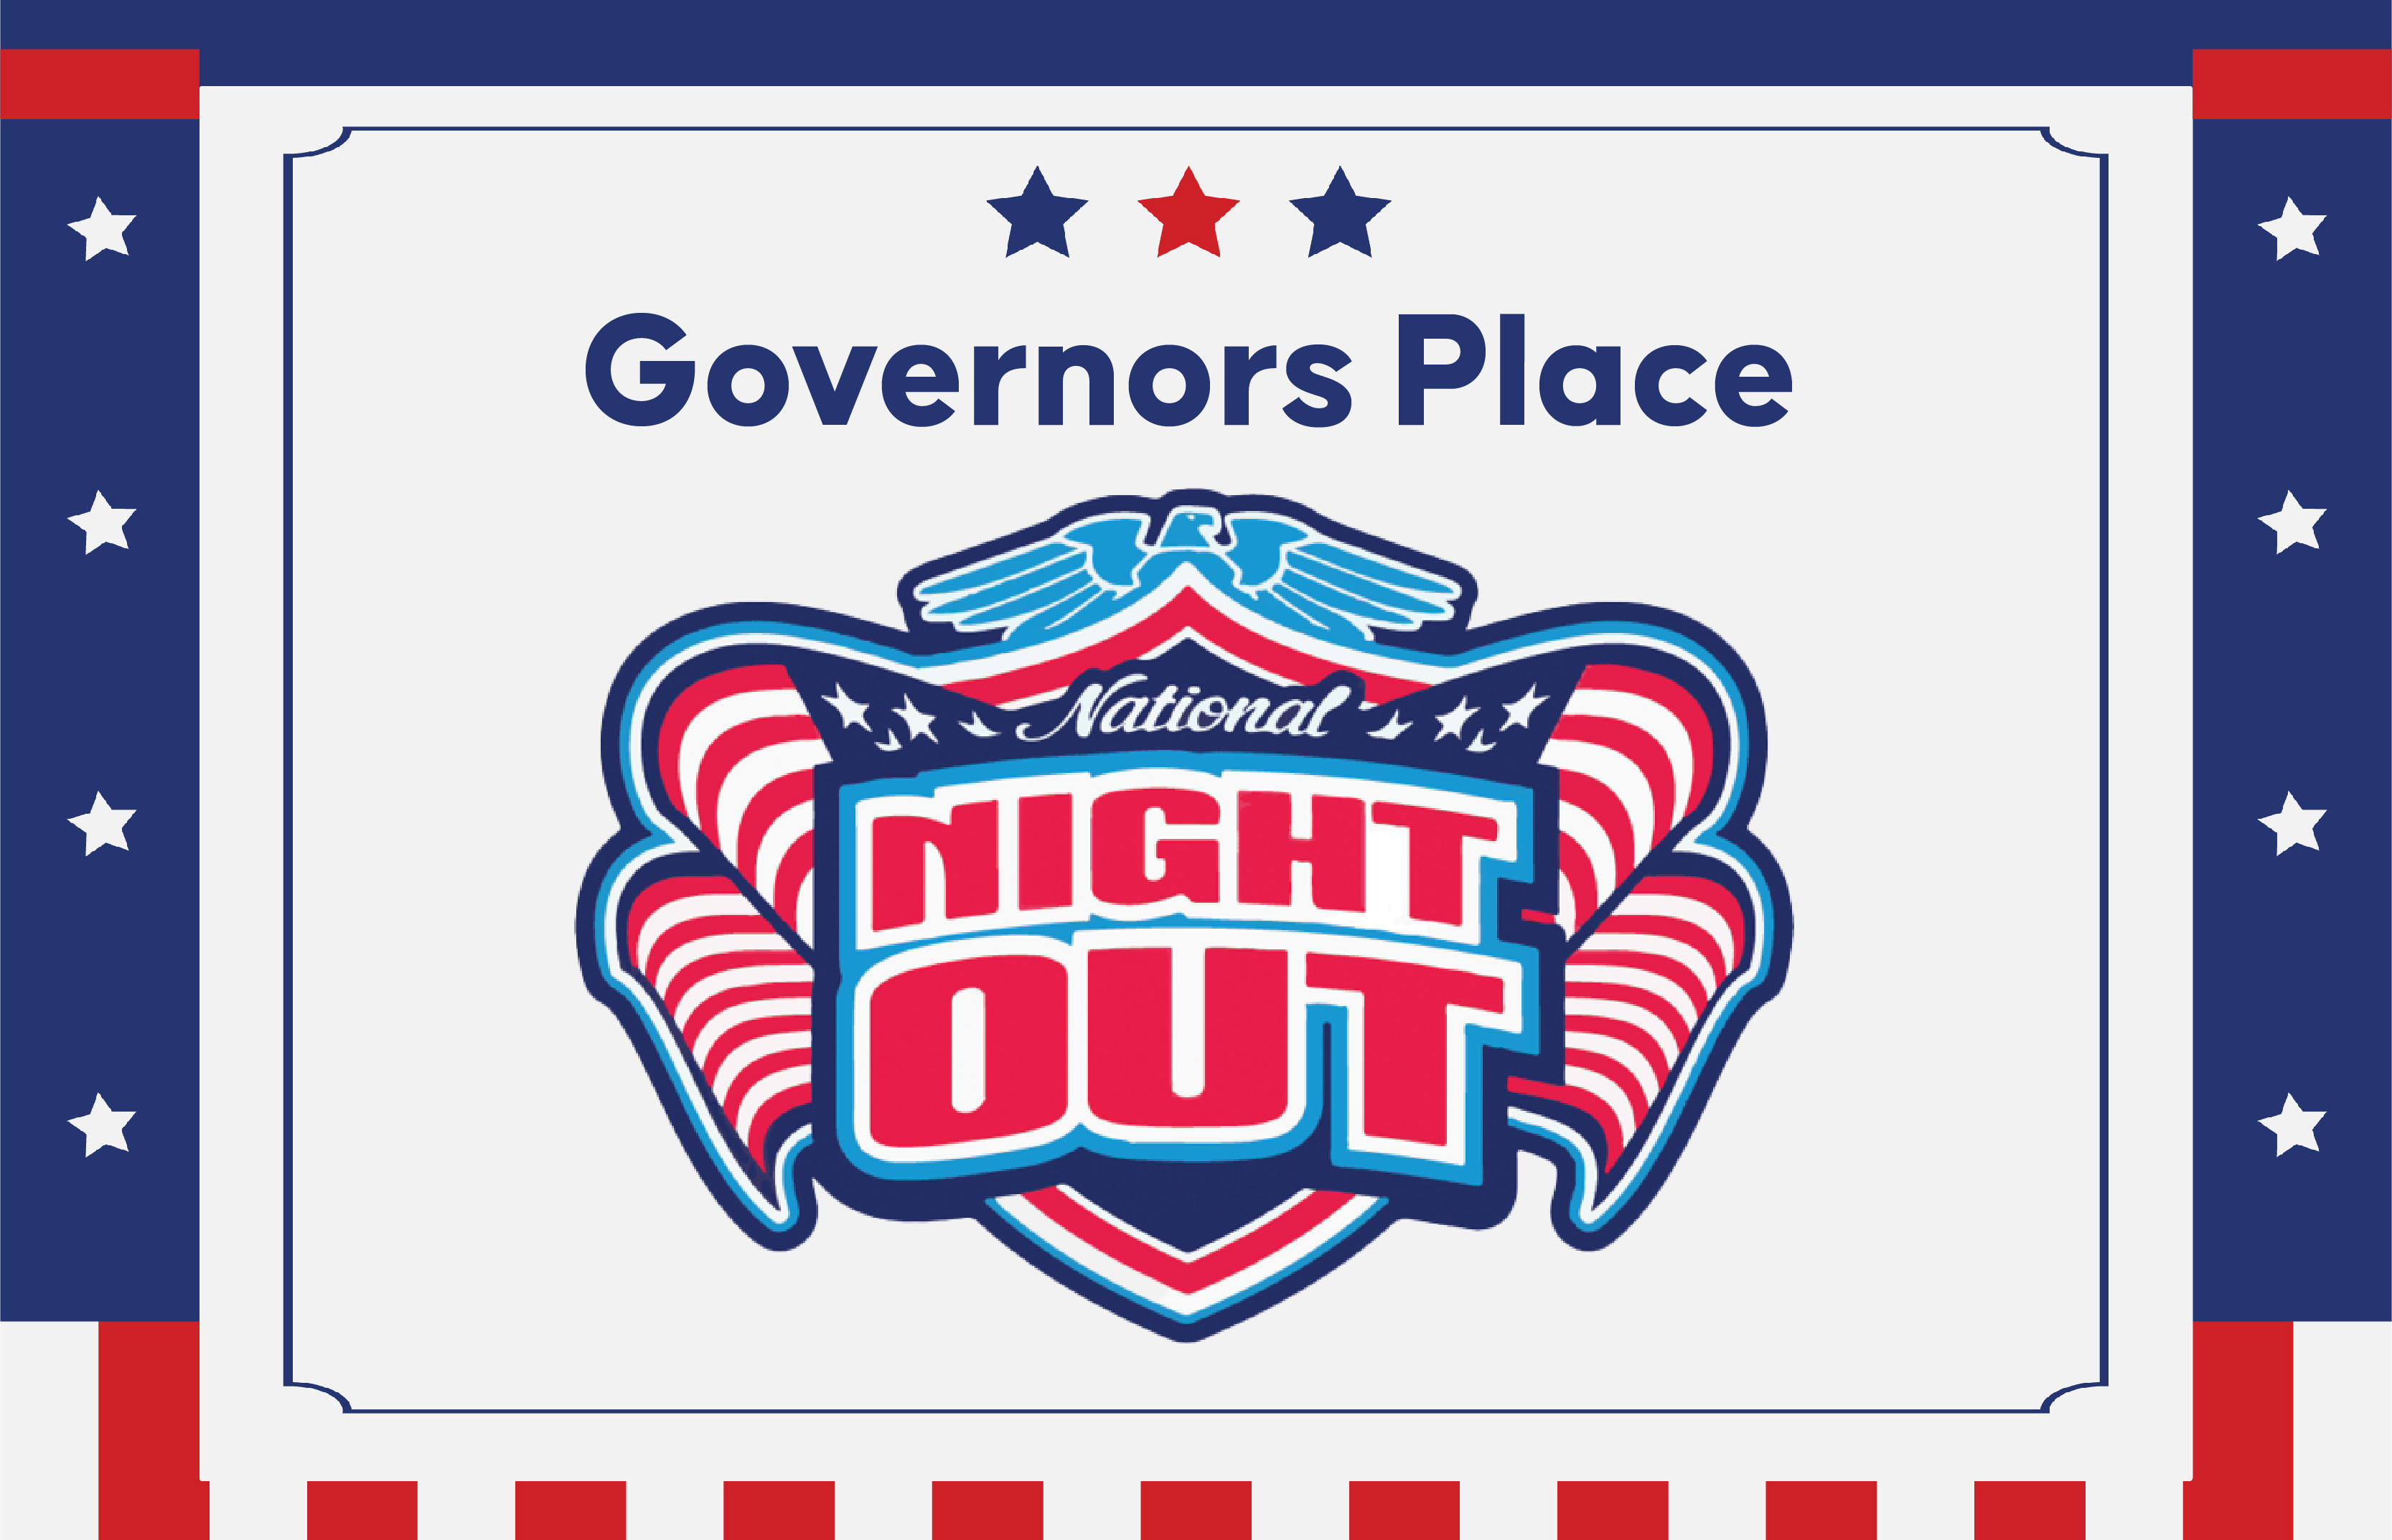 Join Us for Neighborhood Night Out in Governors Place on Oct. 3